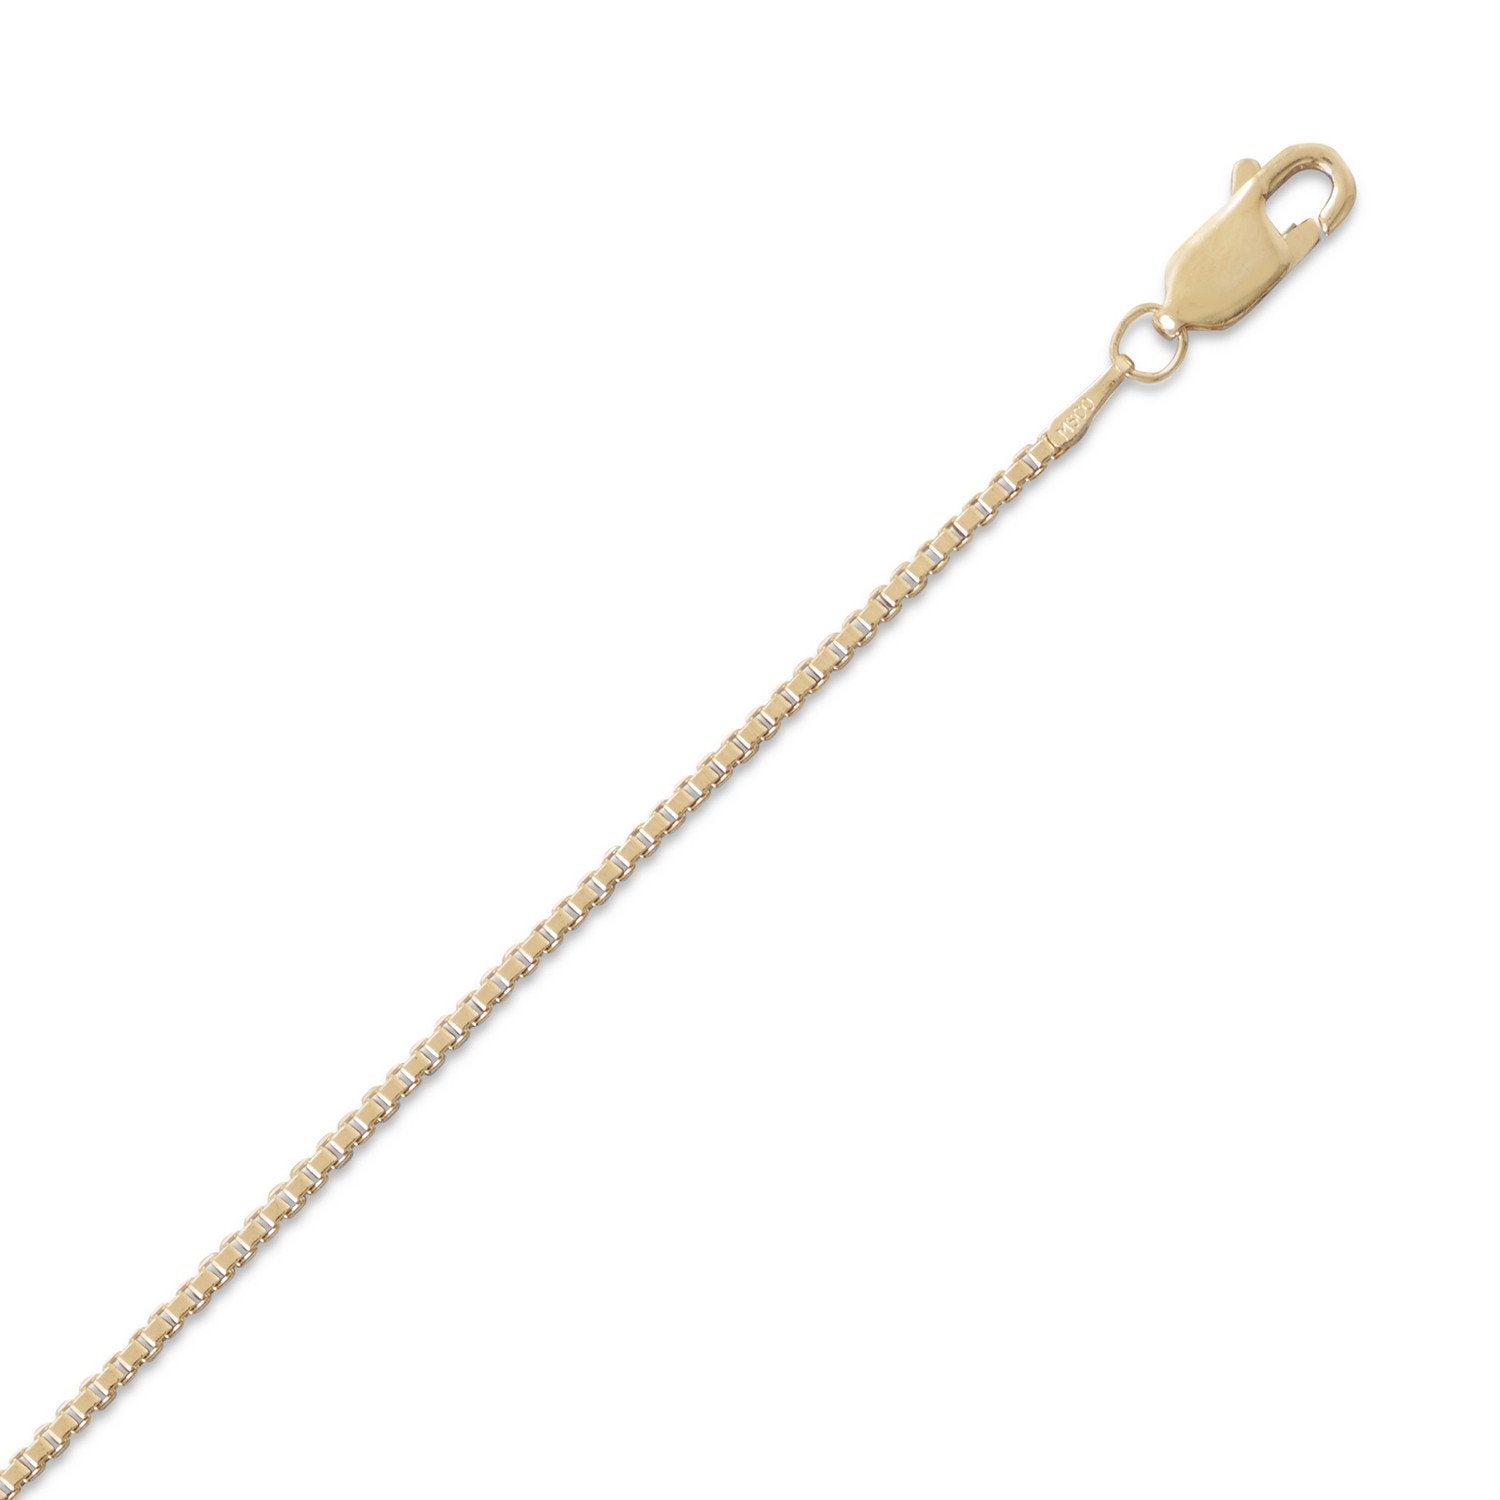 14/20 Gold Filled Box Chain Necklace (1.5mm) - Joyeria Lady